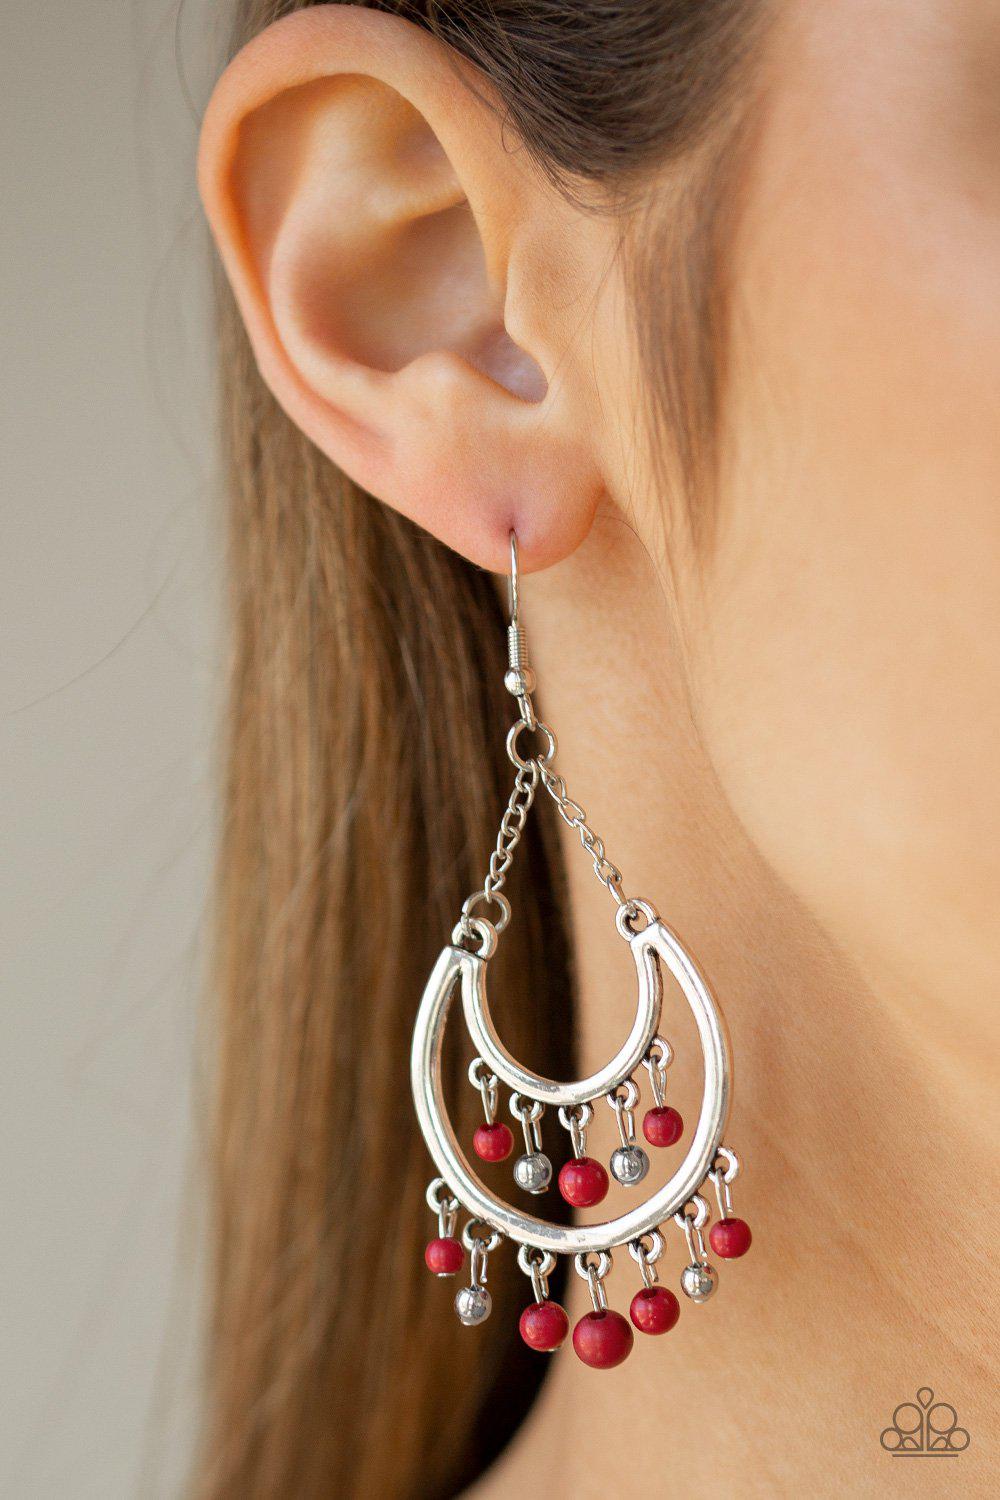 Free-Spirited Spirit Red and Silver Earrings - Paparazzi Accessories - model -CarasShop.com - $5 Jewelry by Cara Jewels